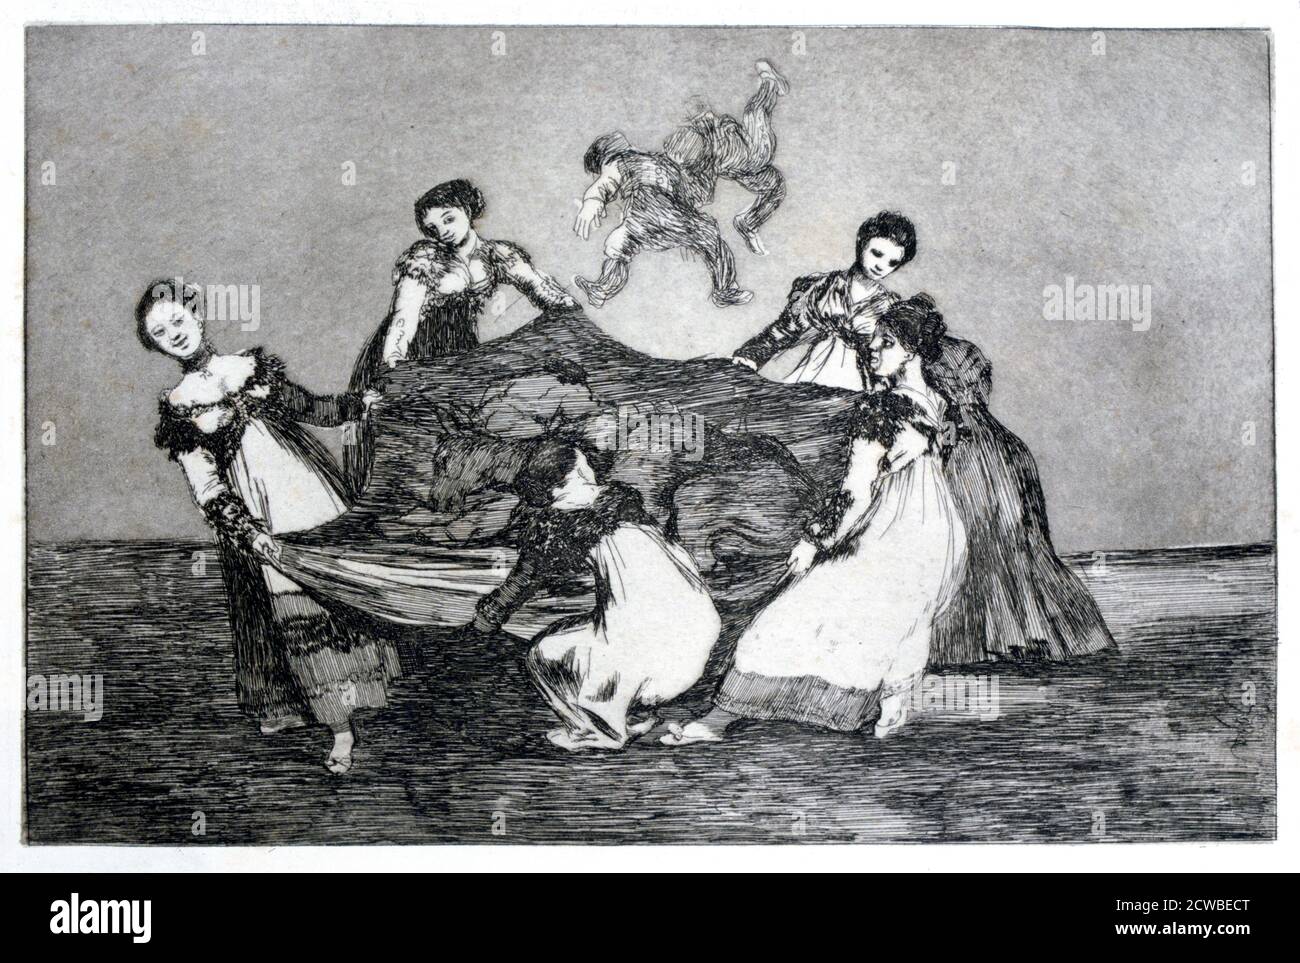 Female Riddle', 1819-1823 Artist: Francisco Goya. Plate 1 of 'Proverbs', published in 1864 by the Spanish Royal Academy of Fine Arts in Madrid. 'Proverbs' is an album of twenty-two prints which is the last major series of prints by Francisco Goya. Stock Photo